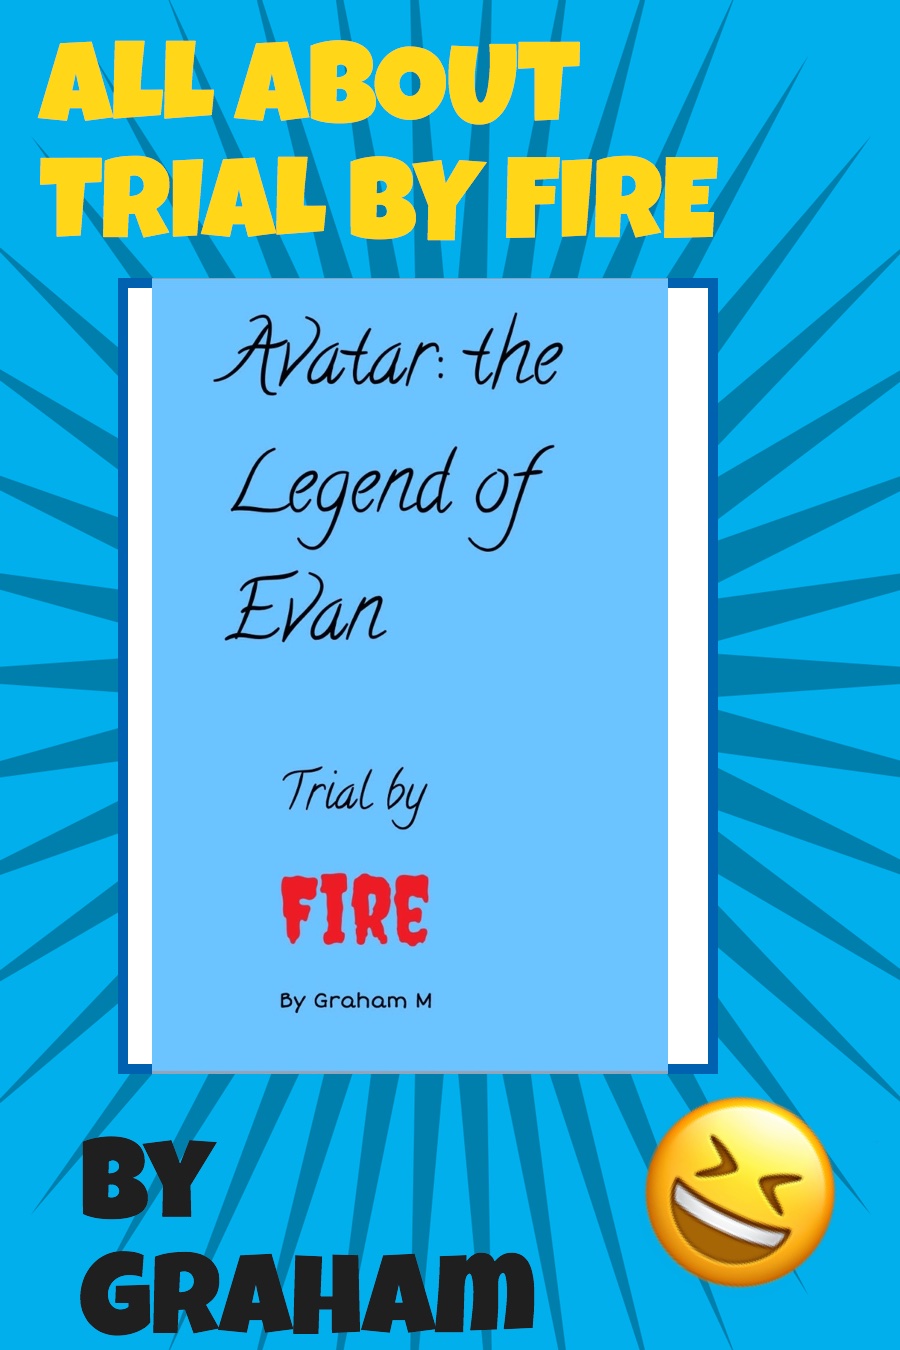 All About Trial By Fire by Graham M